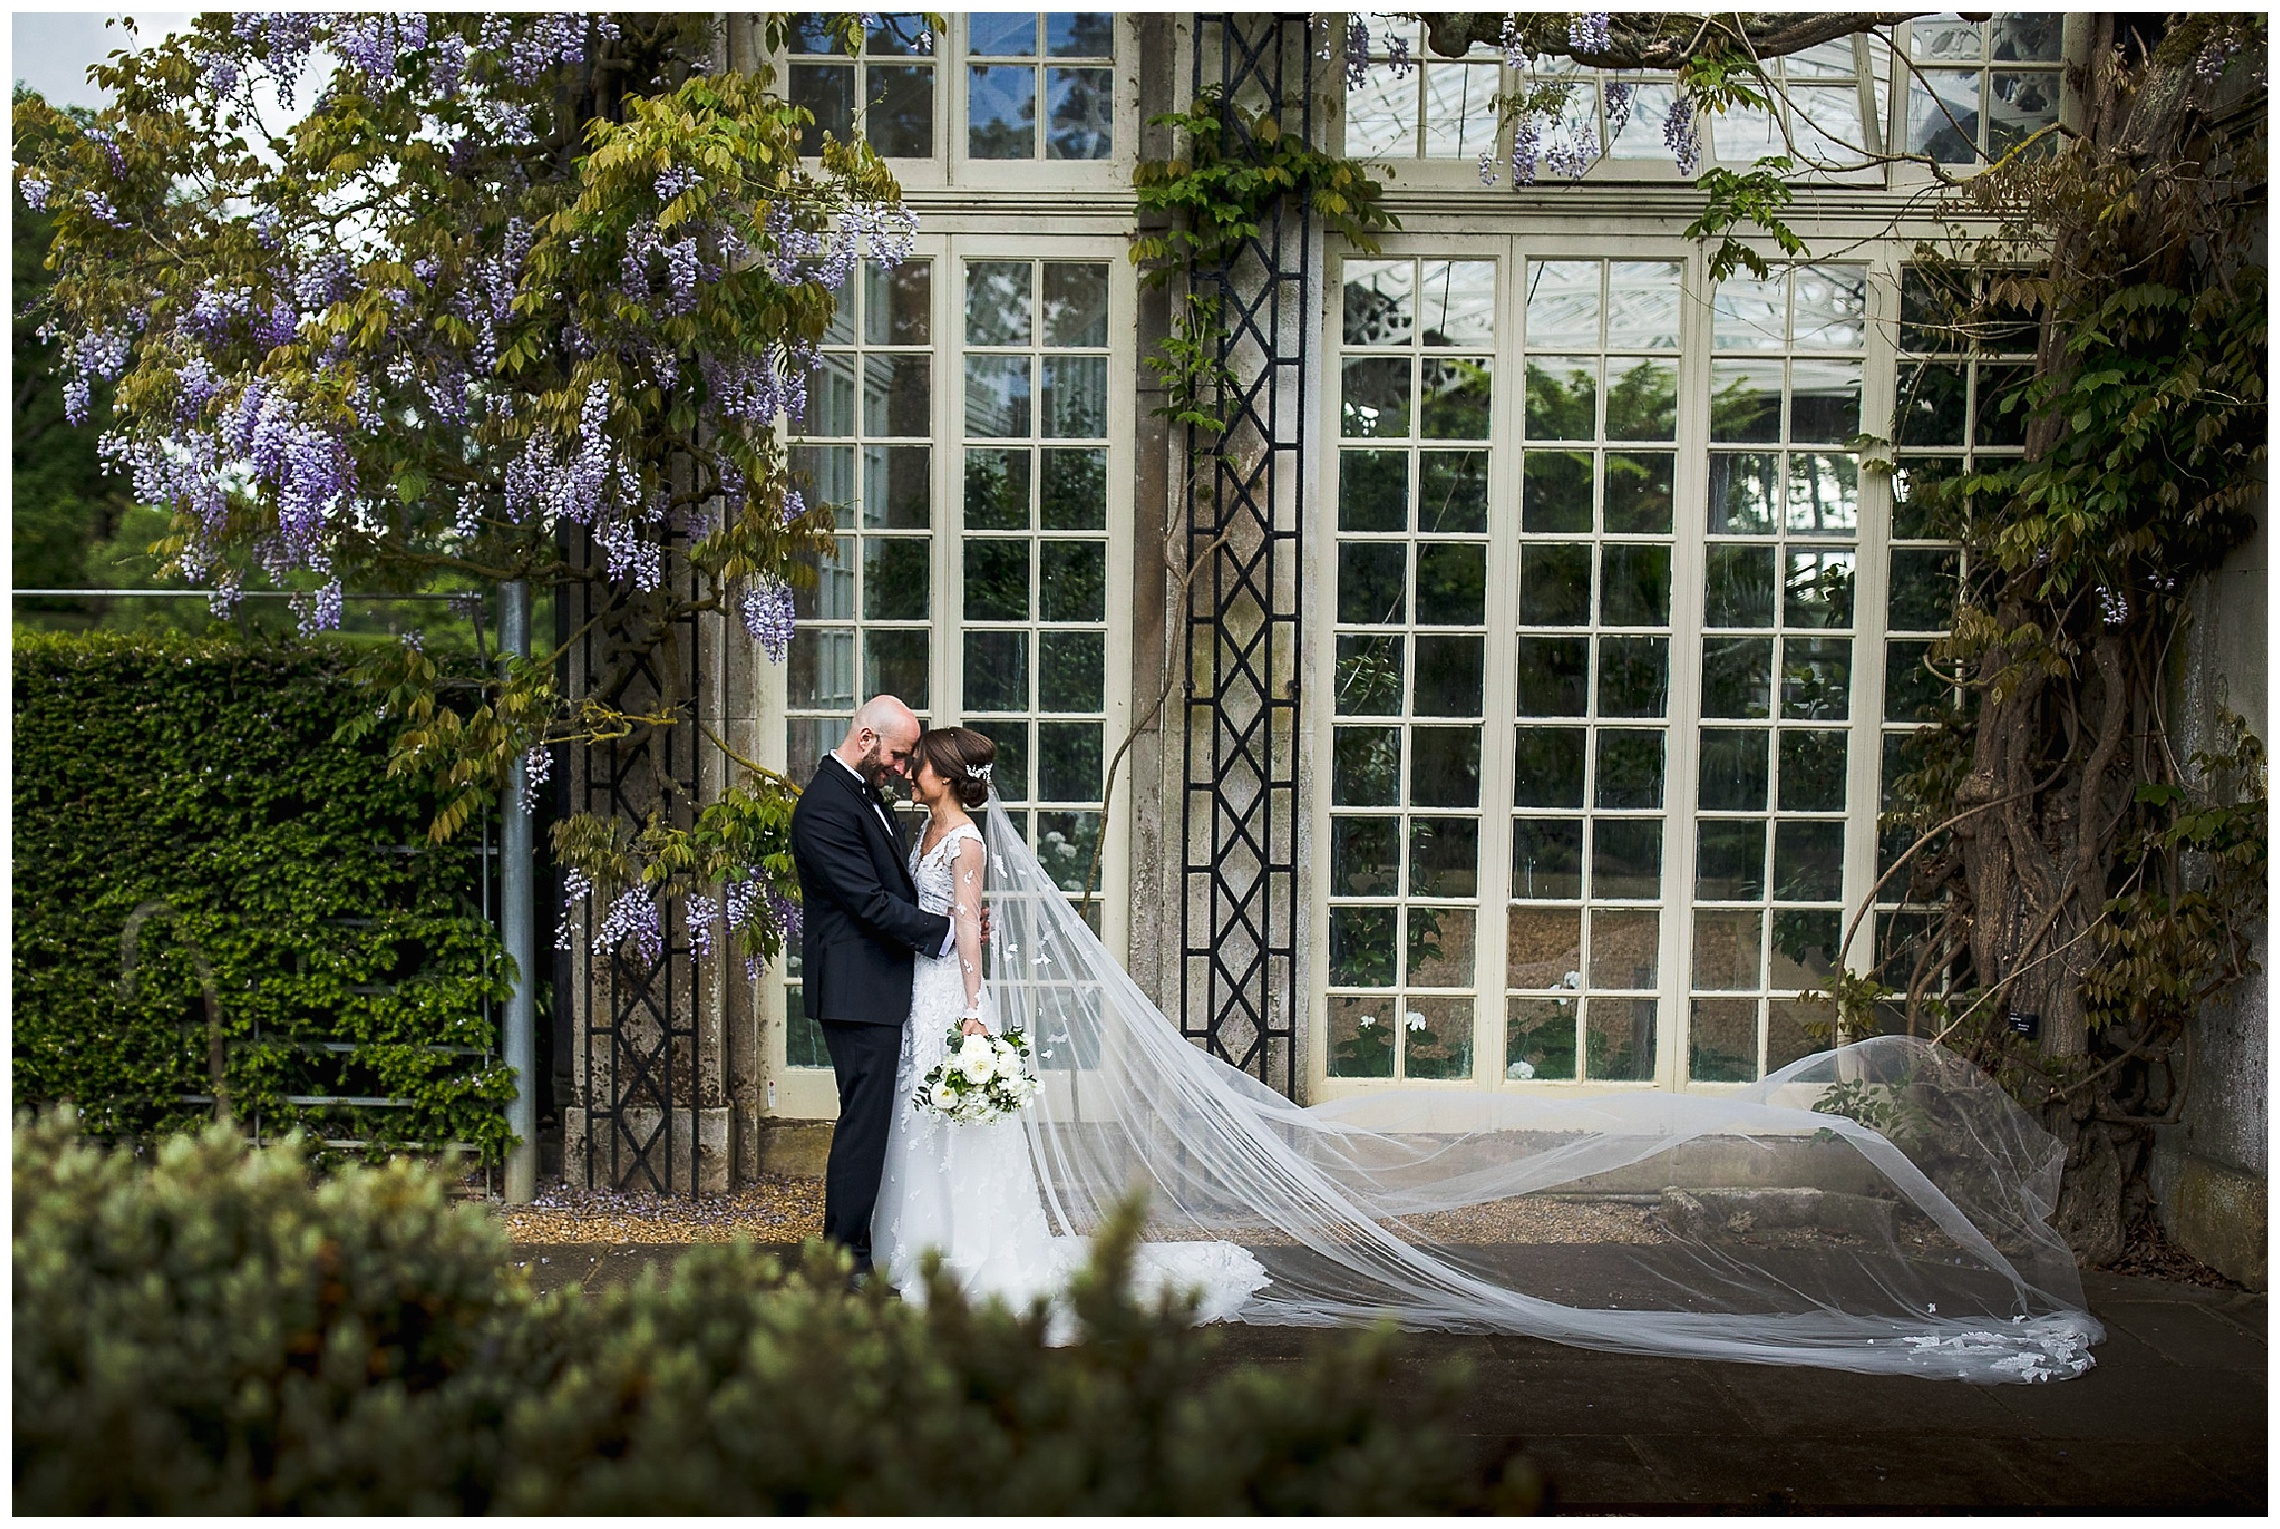 wisteria outside building with bride and groom stood nearby